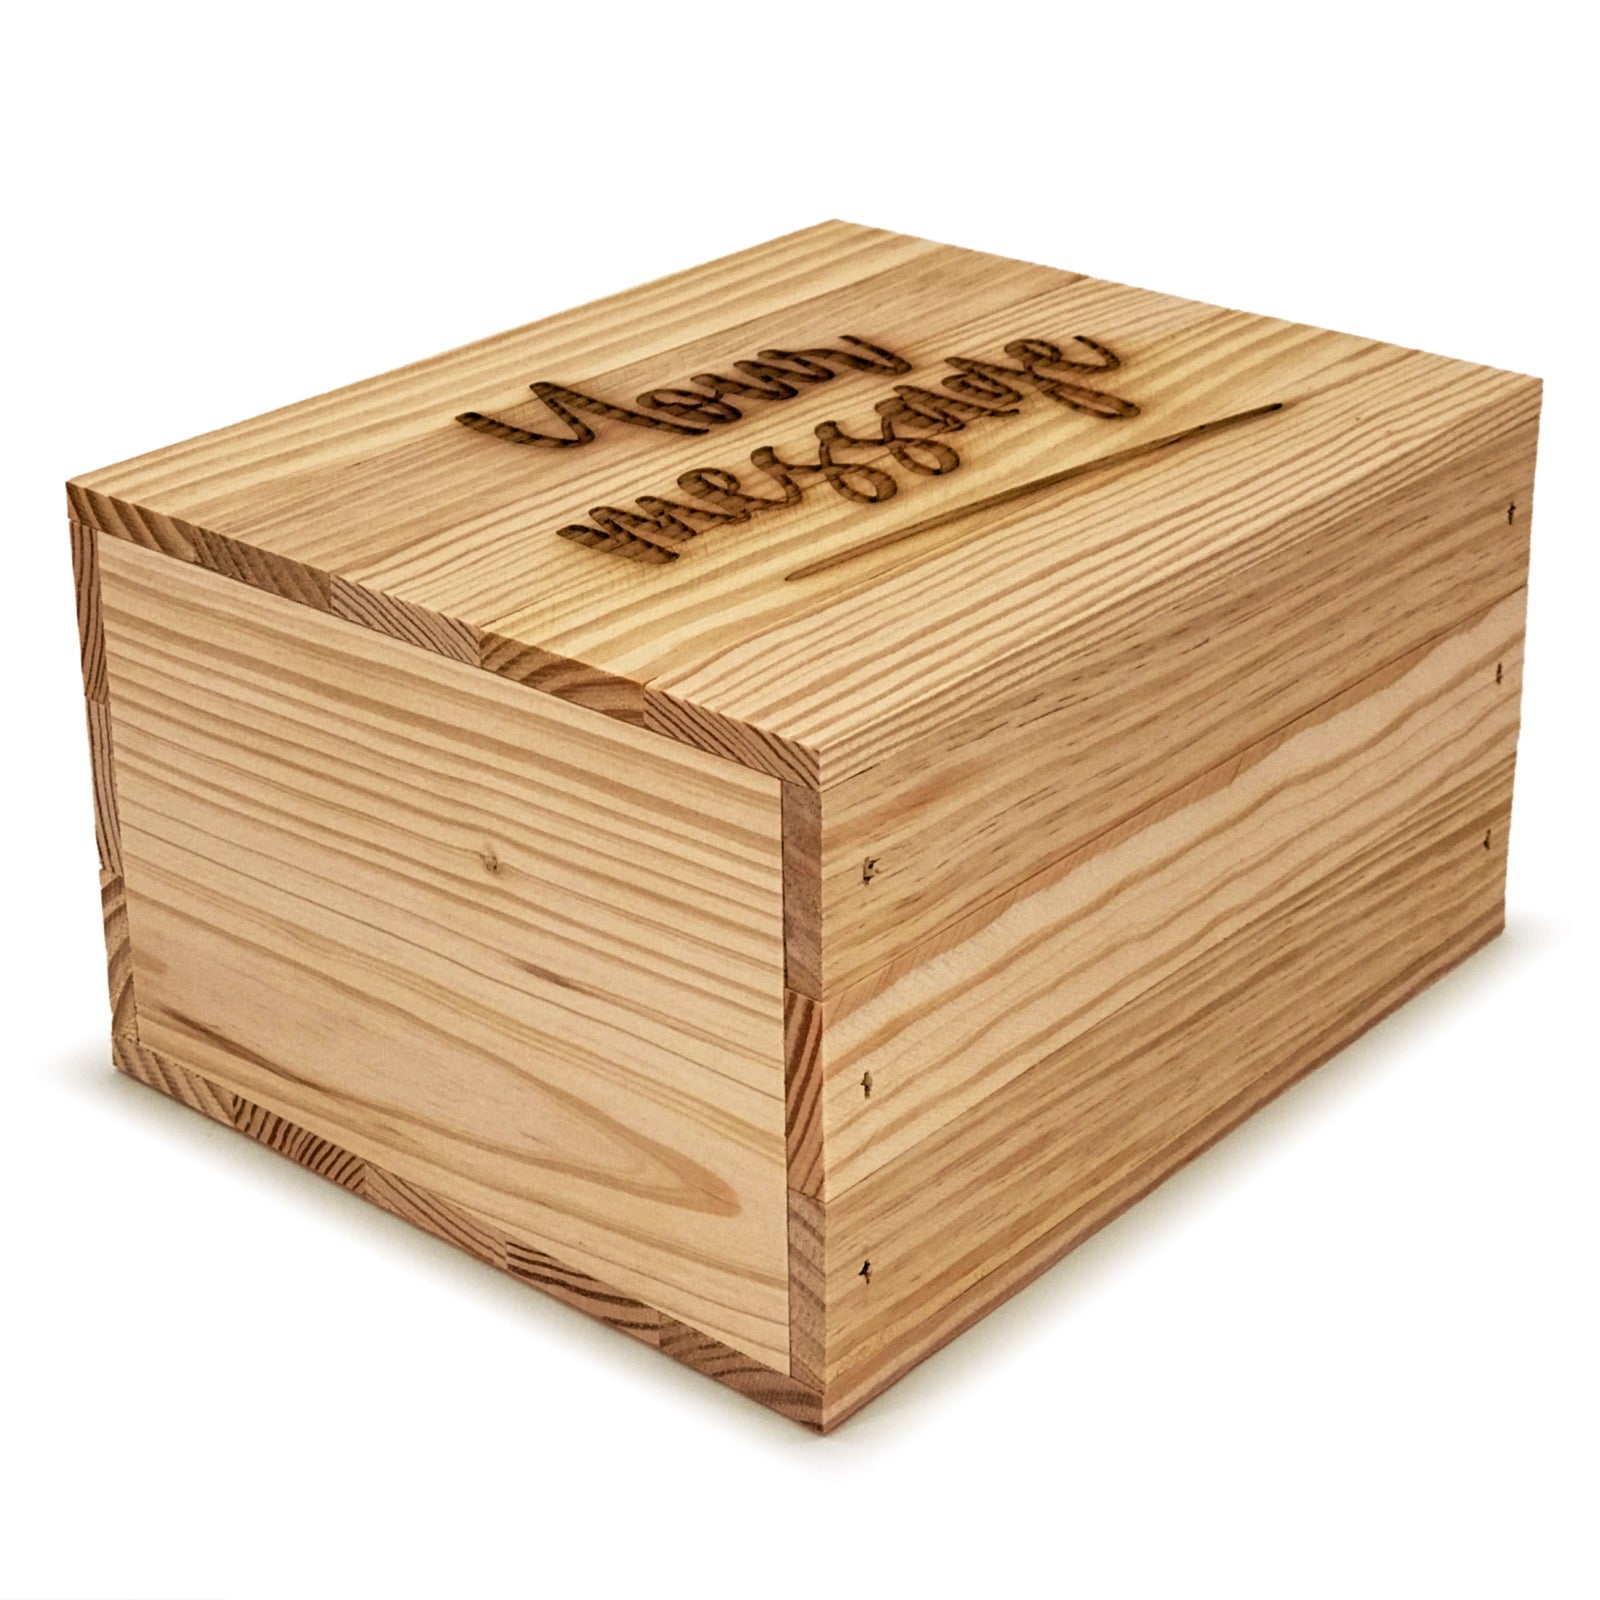 Small wooden crate with custom message on lid 9x8x5.25